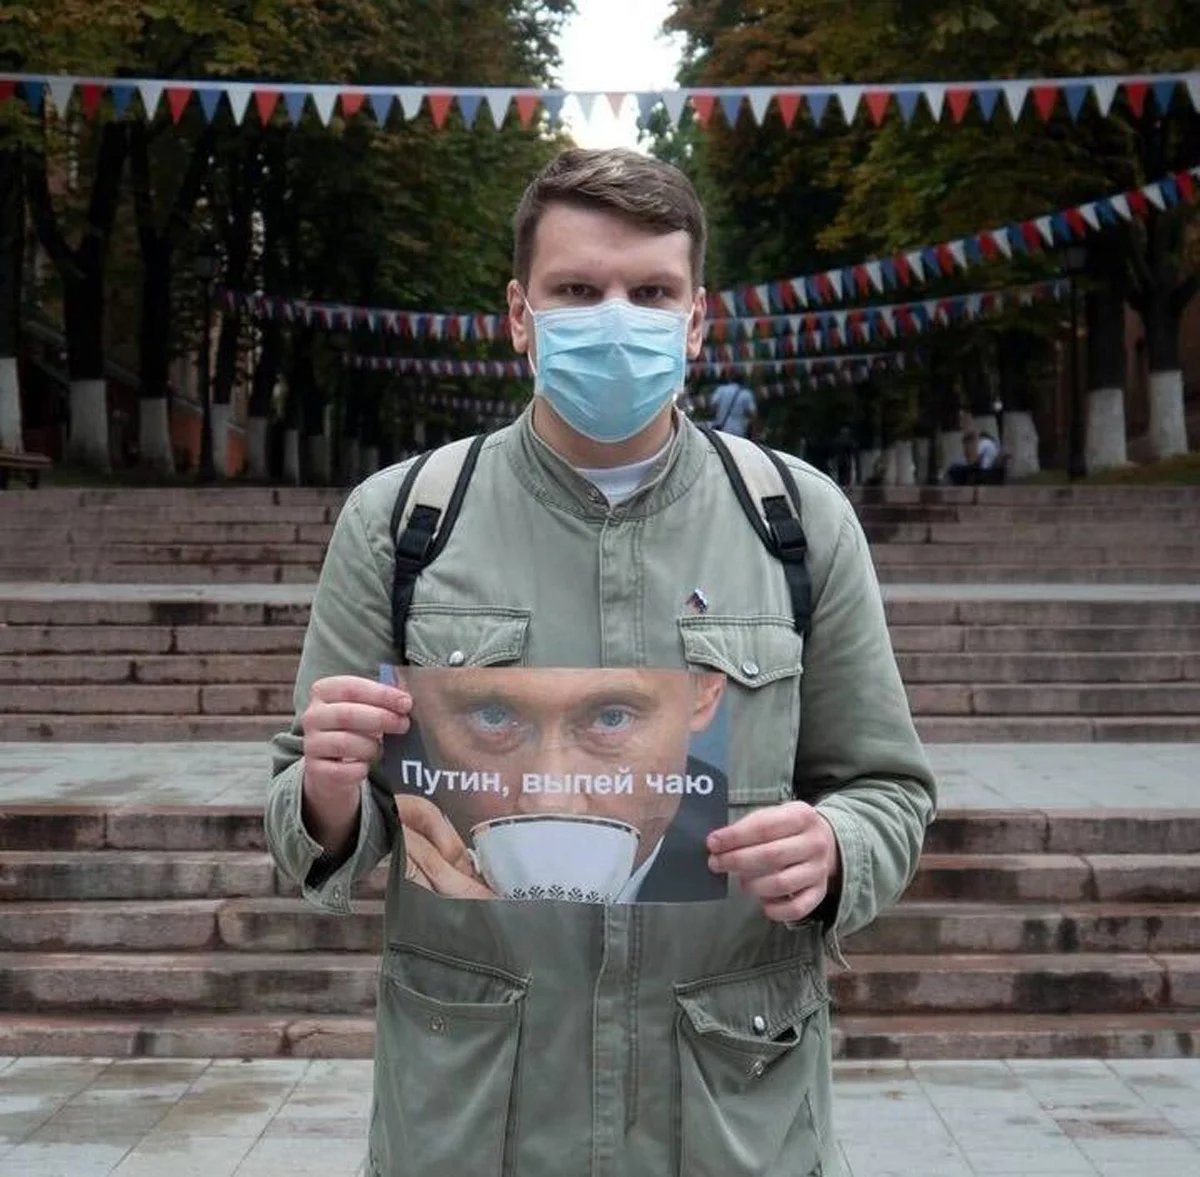 Korshunov holds a sign saying: “Putin, drink tea”. Photo: from private archive